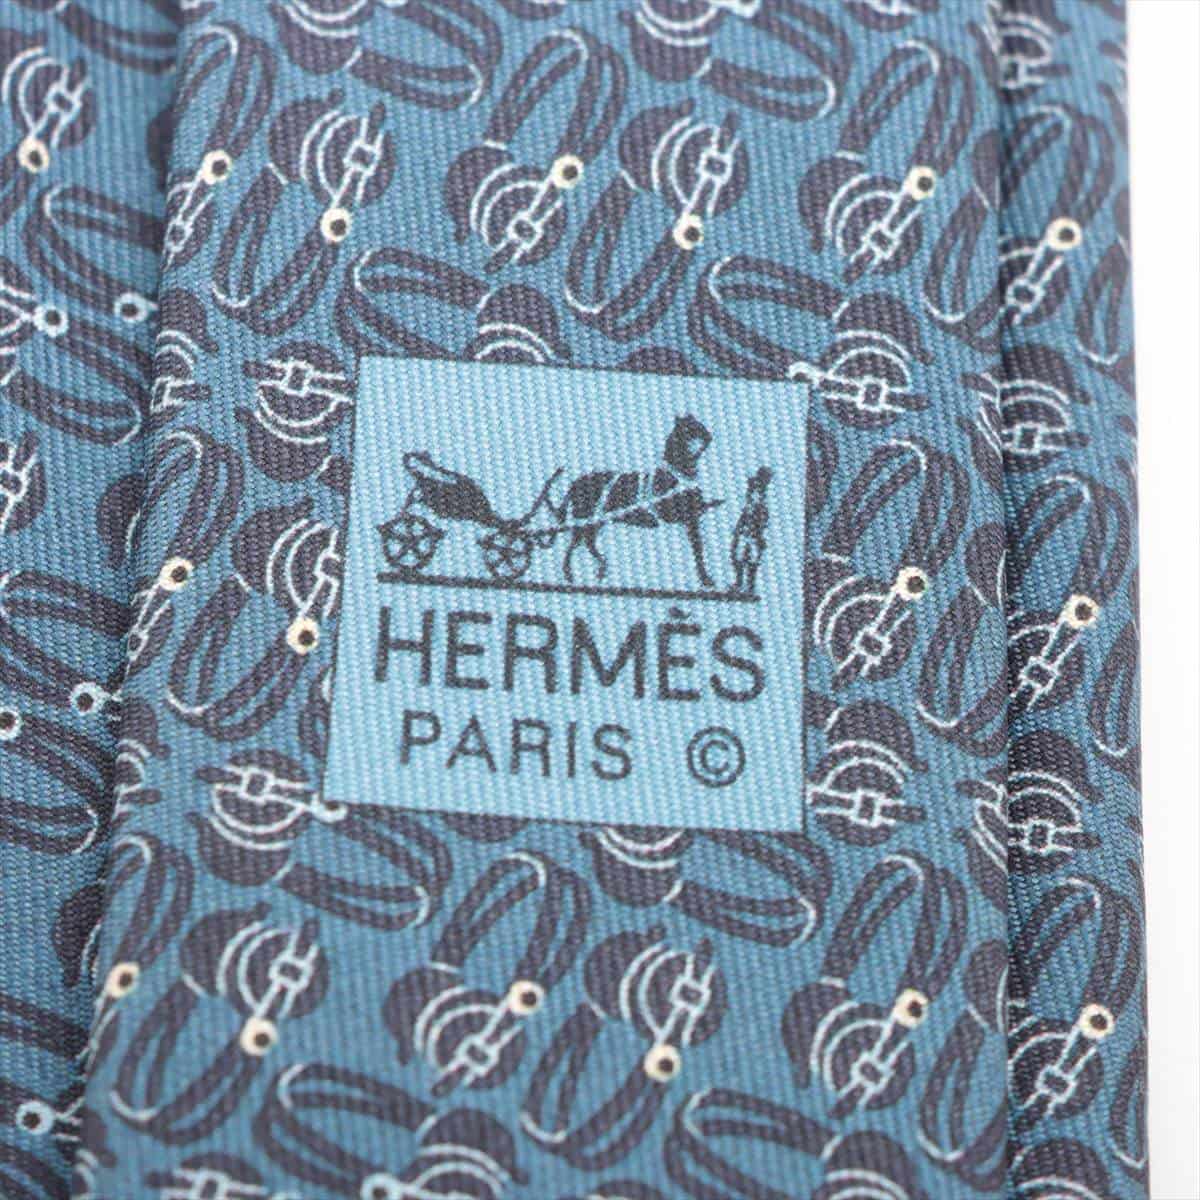 Hermès Necktie Silk Blue There is color fading throughout the thread